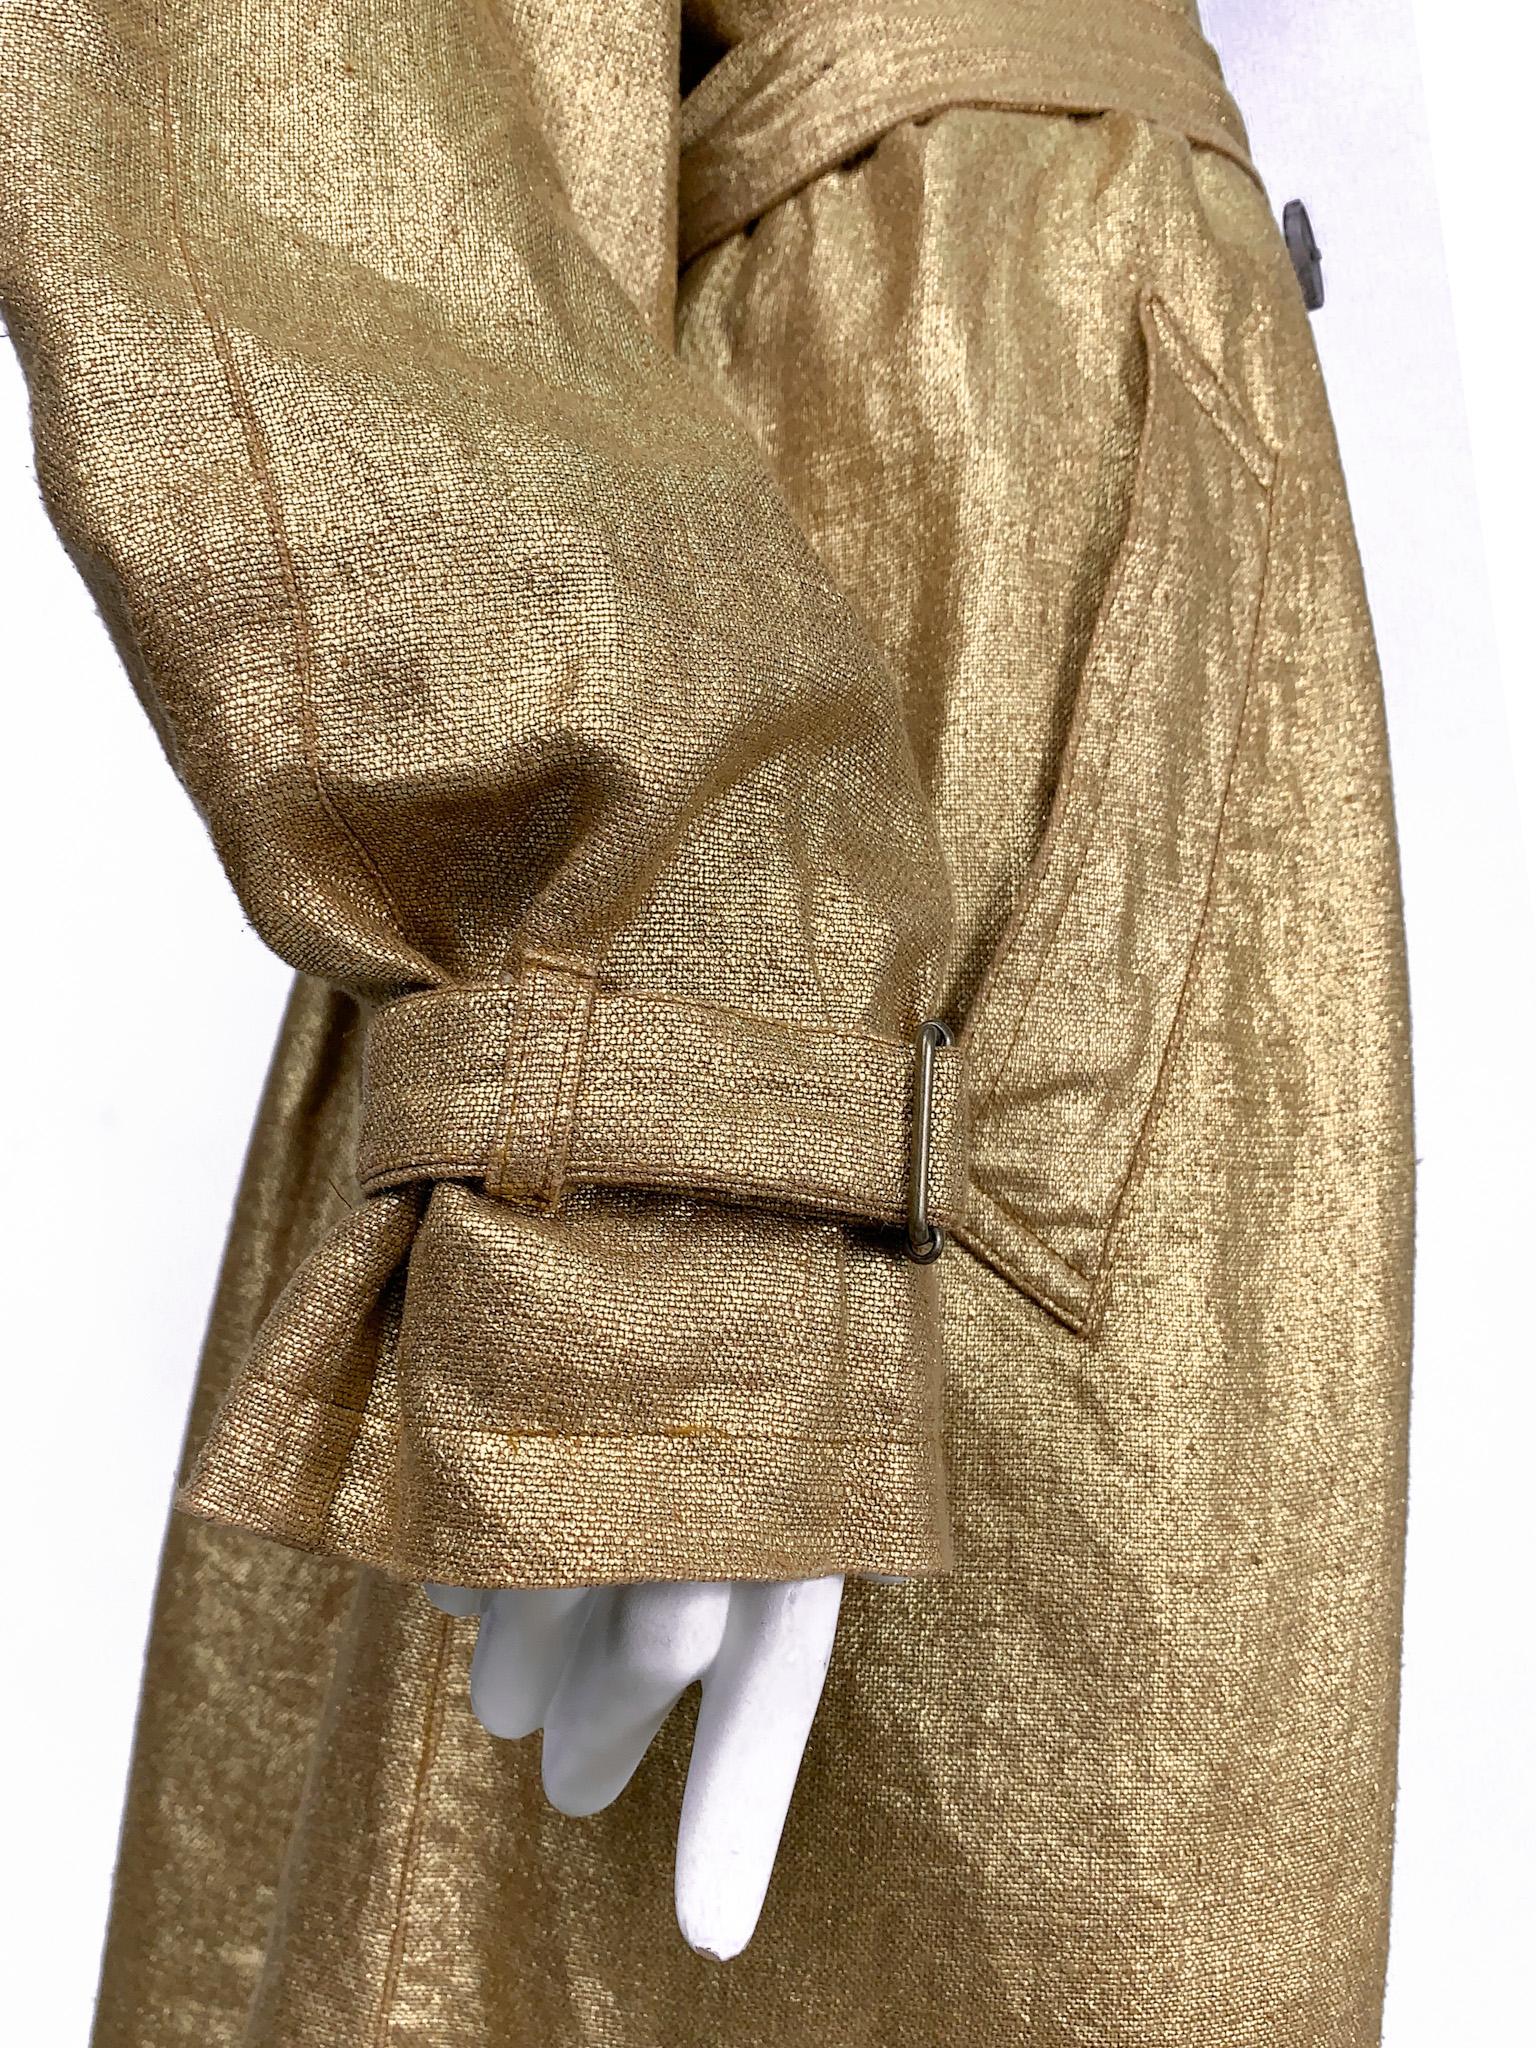 Dries Van Noten Metallic Gold Double-Breasted Belted Long Trench Coat, Unisex For Sale 9